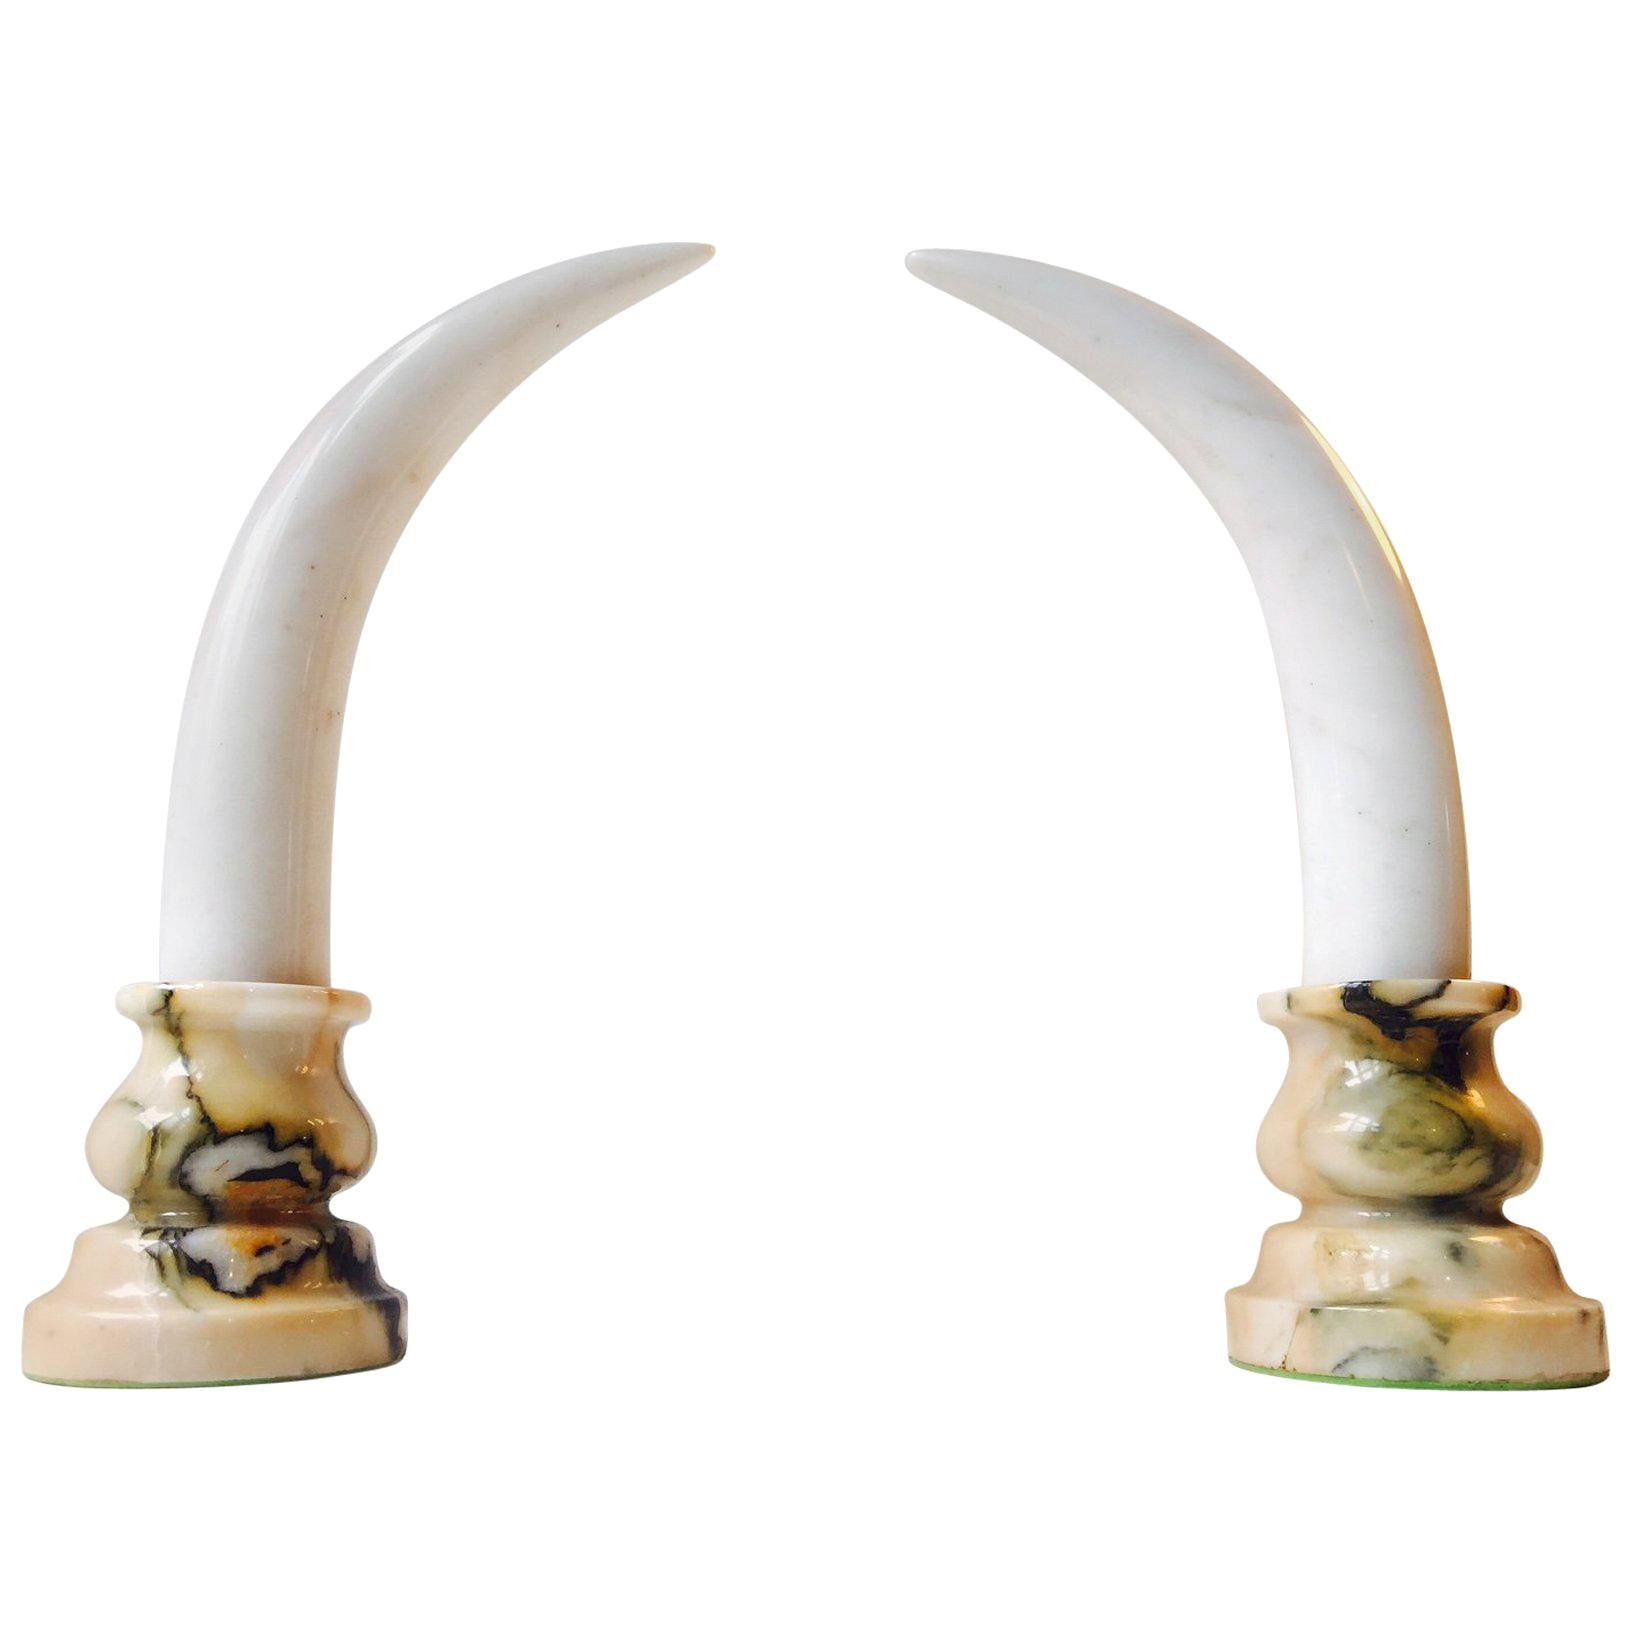 Pair of Faux 'Elephant Tusk', Marble Bookends or Dresser Ornaments, 20th Century